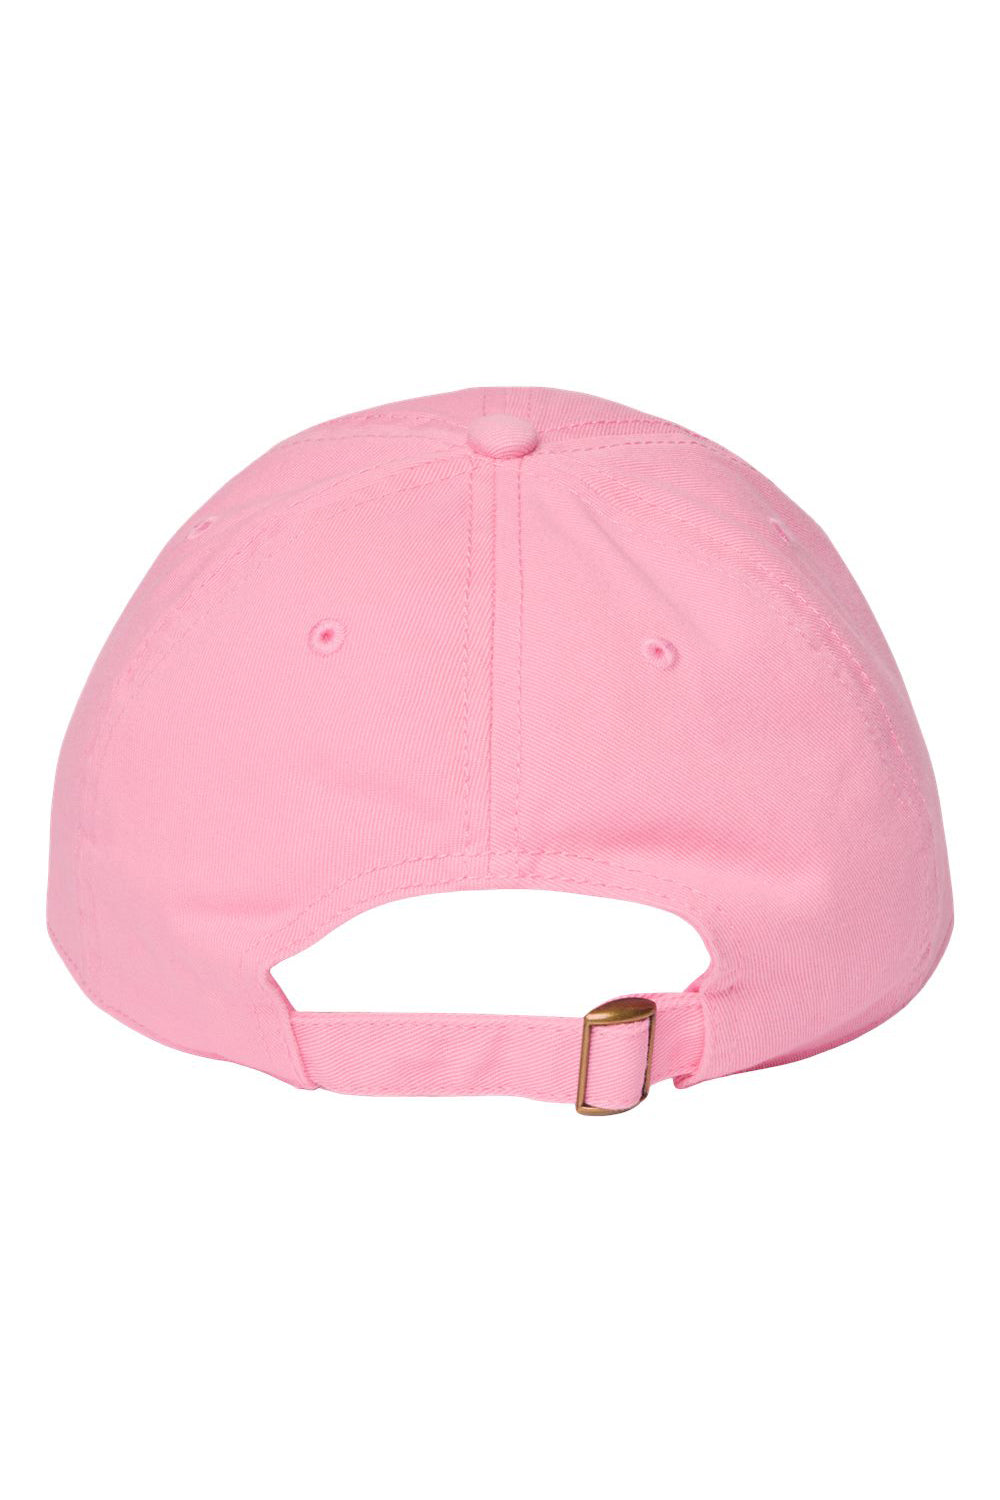 Cap America i1002 Mens Relaxed Adjustable Dad Hat Pink Flat Back